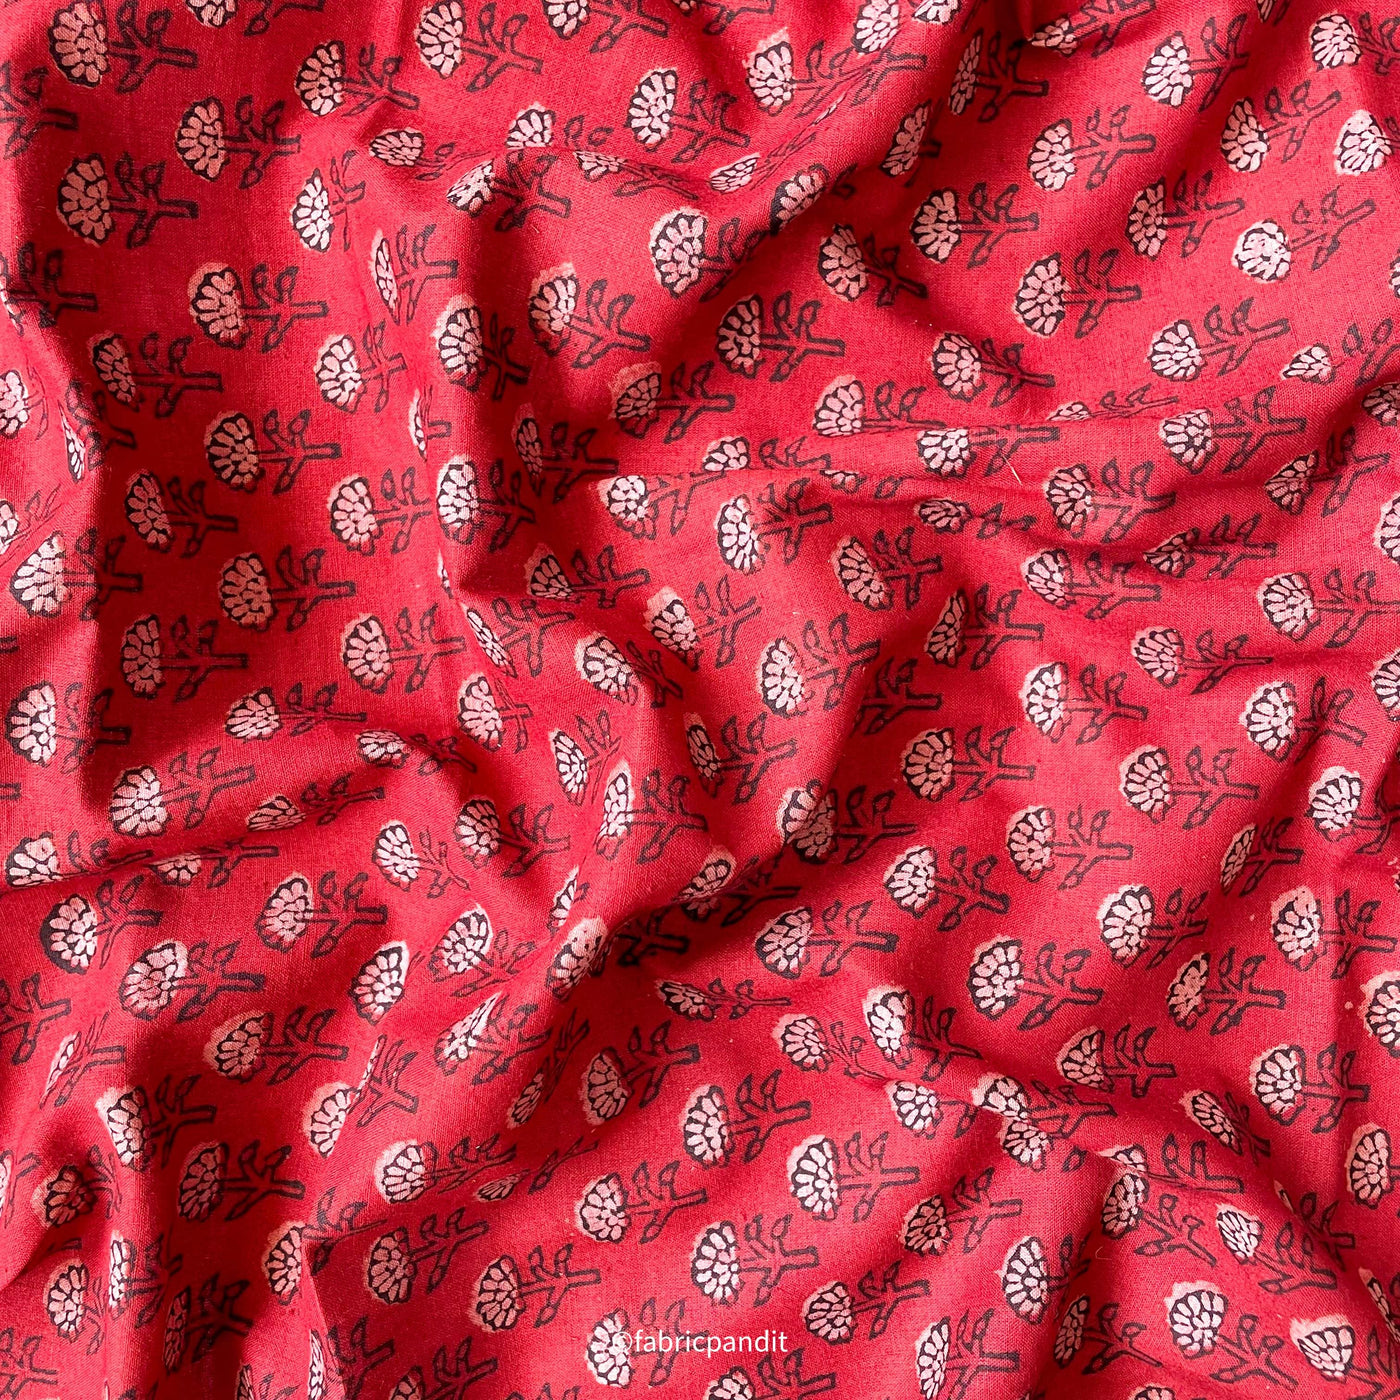 Hand Block Printed Cotton Fabric Cut Piece (CUT PIECE) Dusty Red & Beige Mini Tulips Hand Block Printed Pure Cotton Fabric (Width 42 inches)